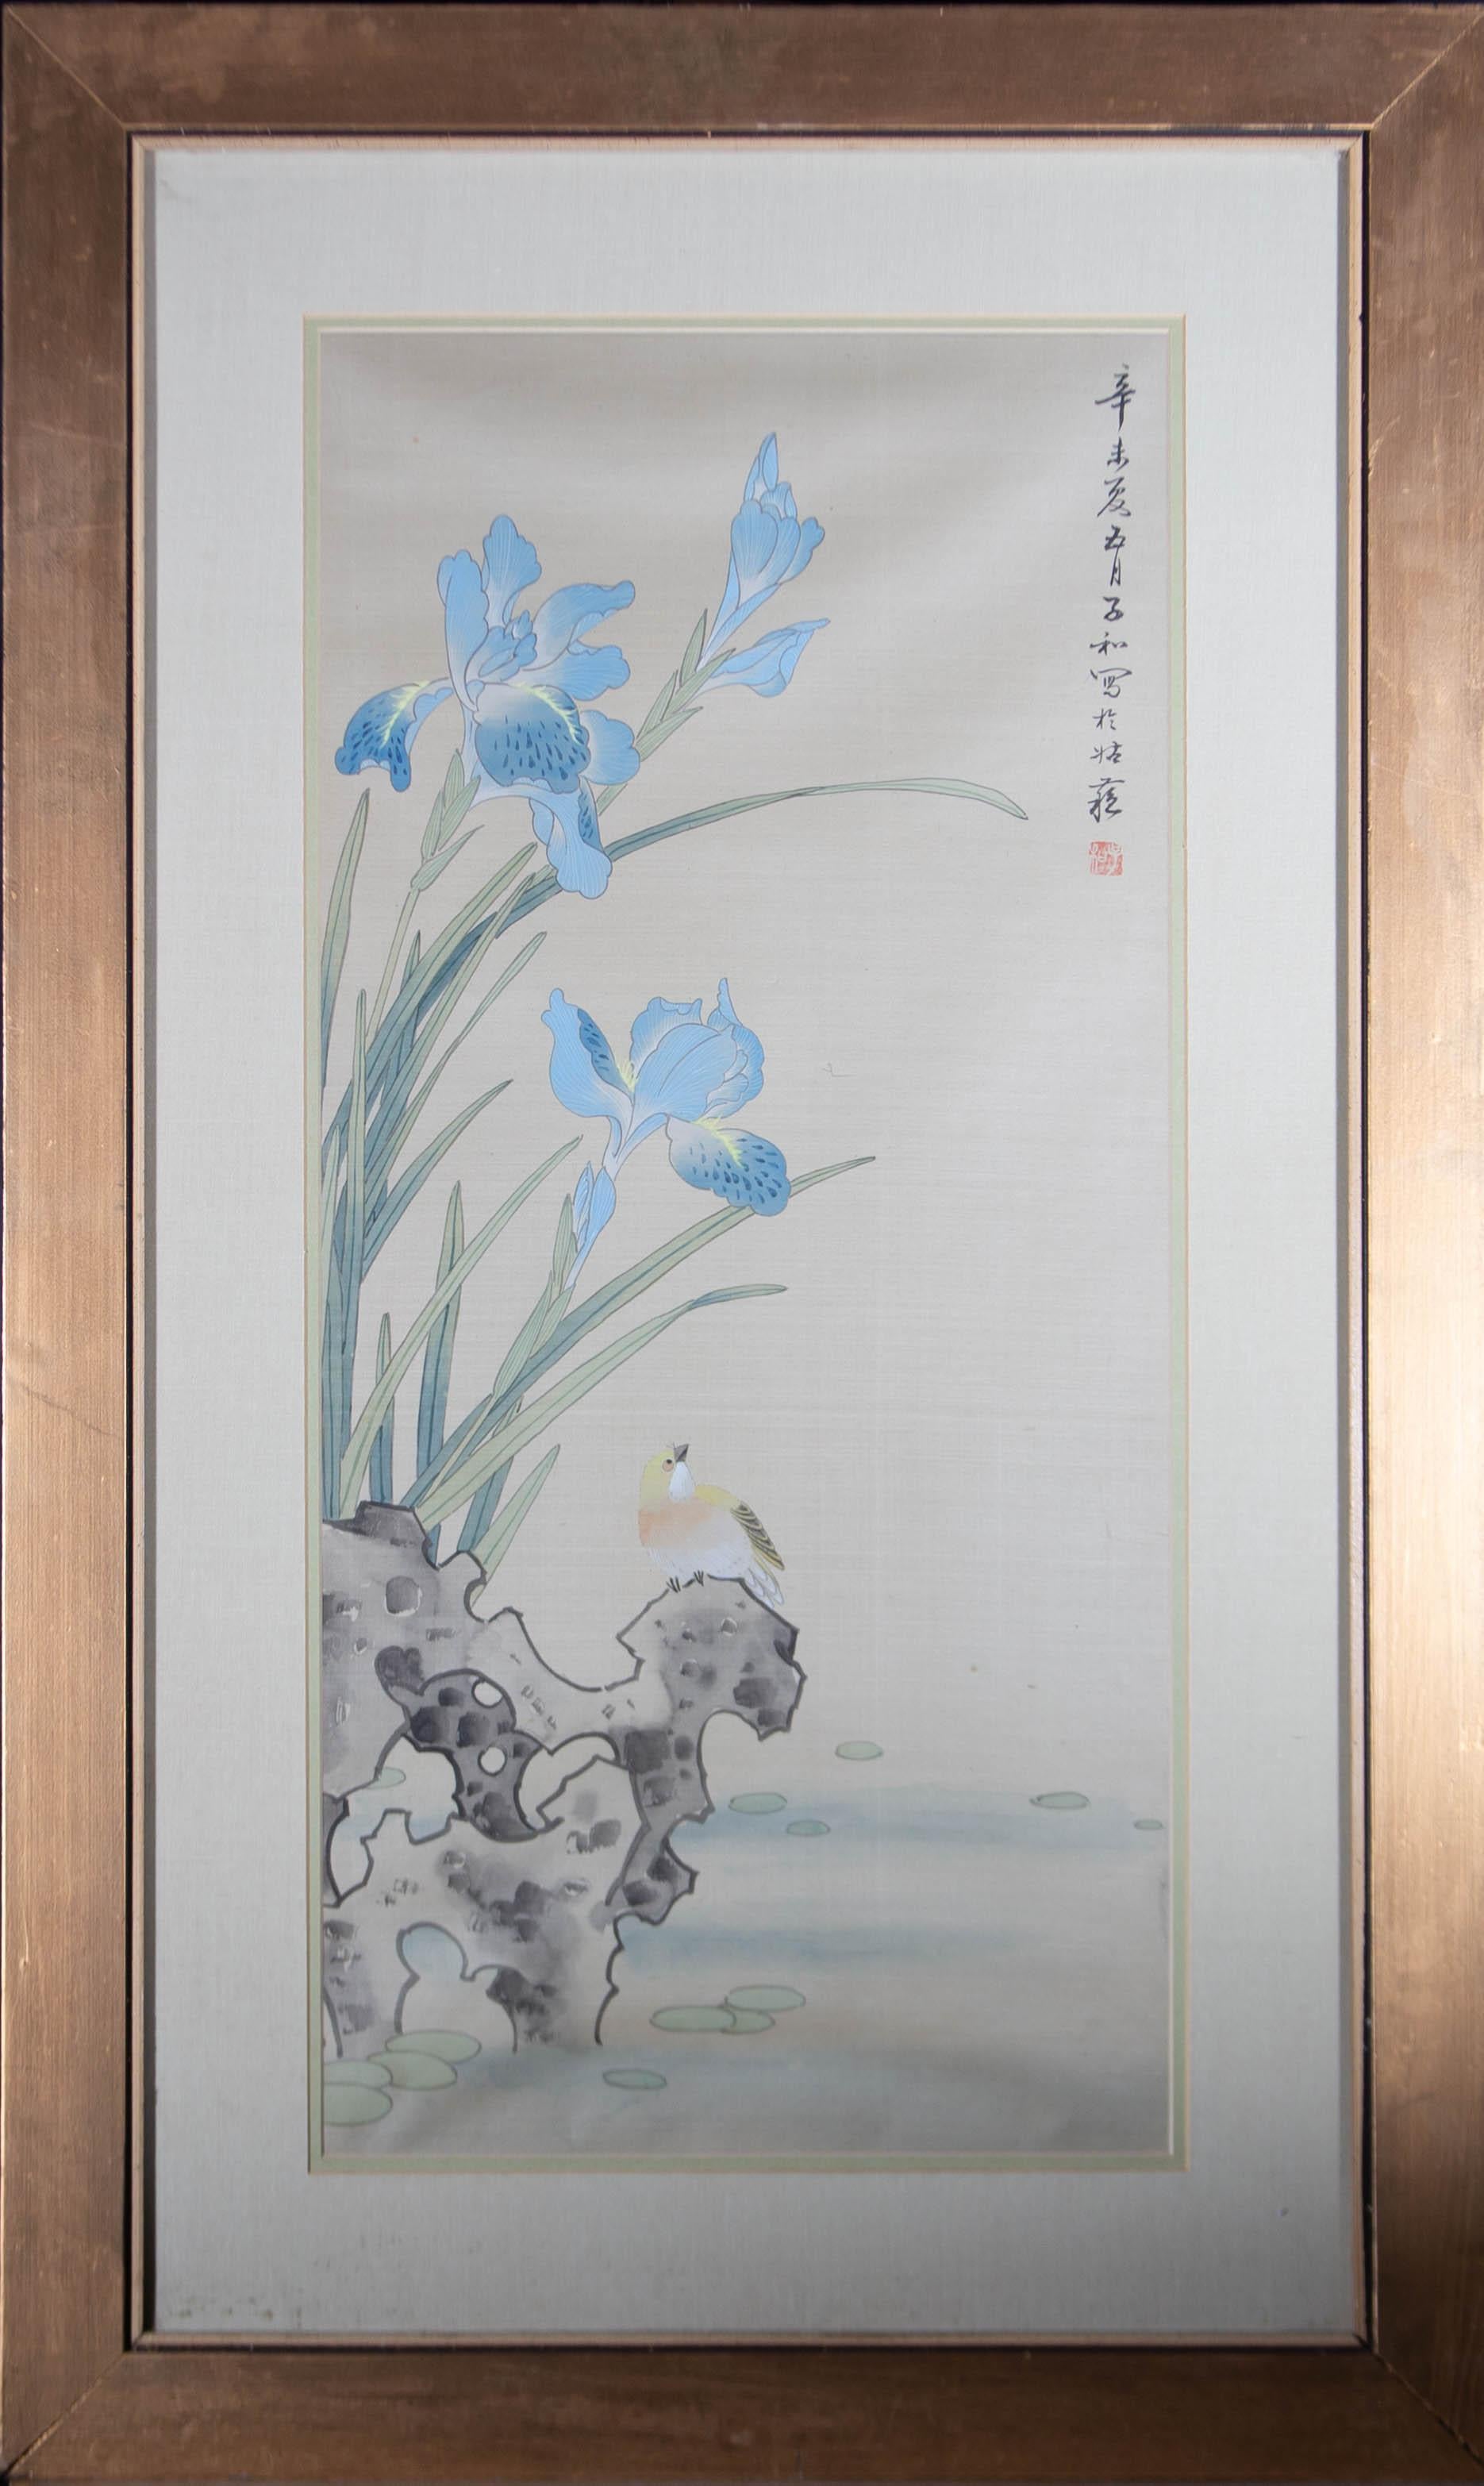 Unknown Animal Art - Mid 20th Century Watercolour - Irises And A Finch